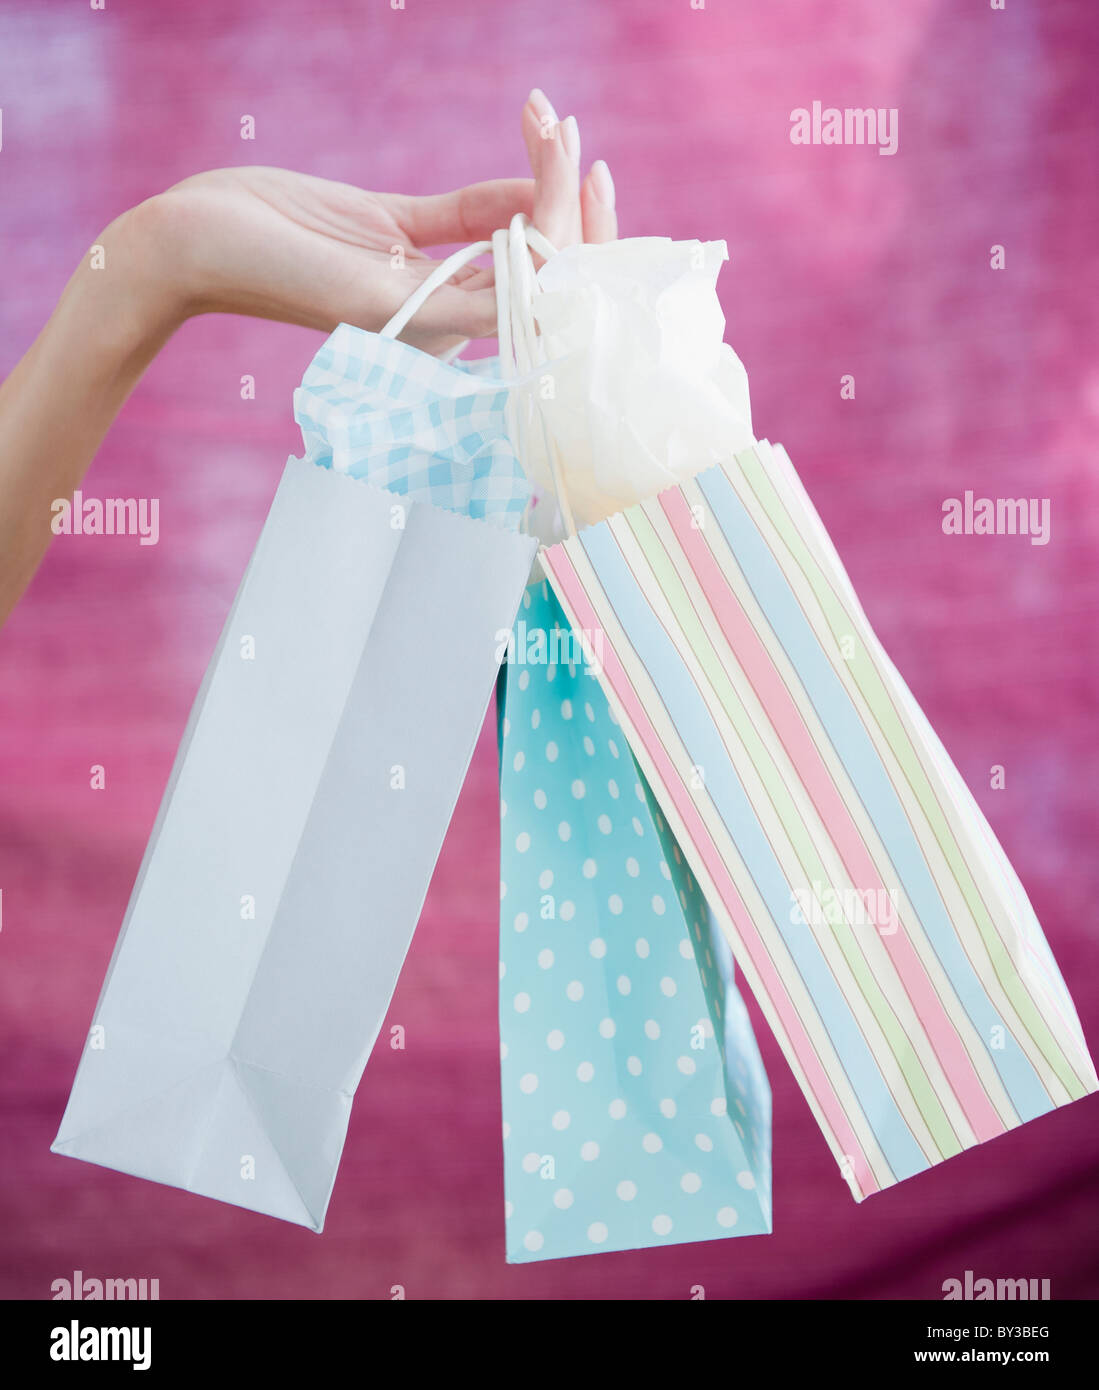 USA, New Jersey, Jersey City, Close-up view of woman's hand holding shopping bags Stock Photo